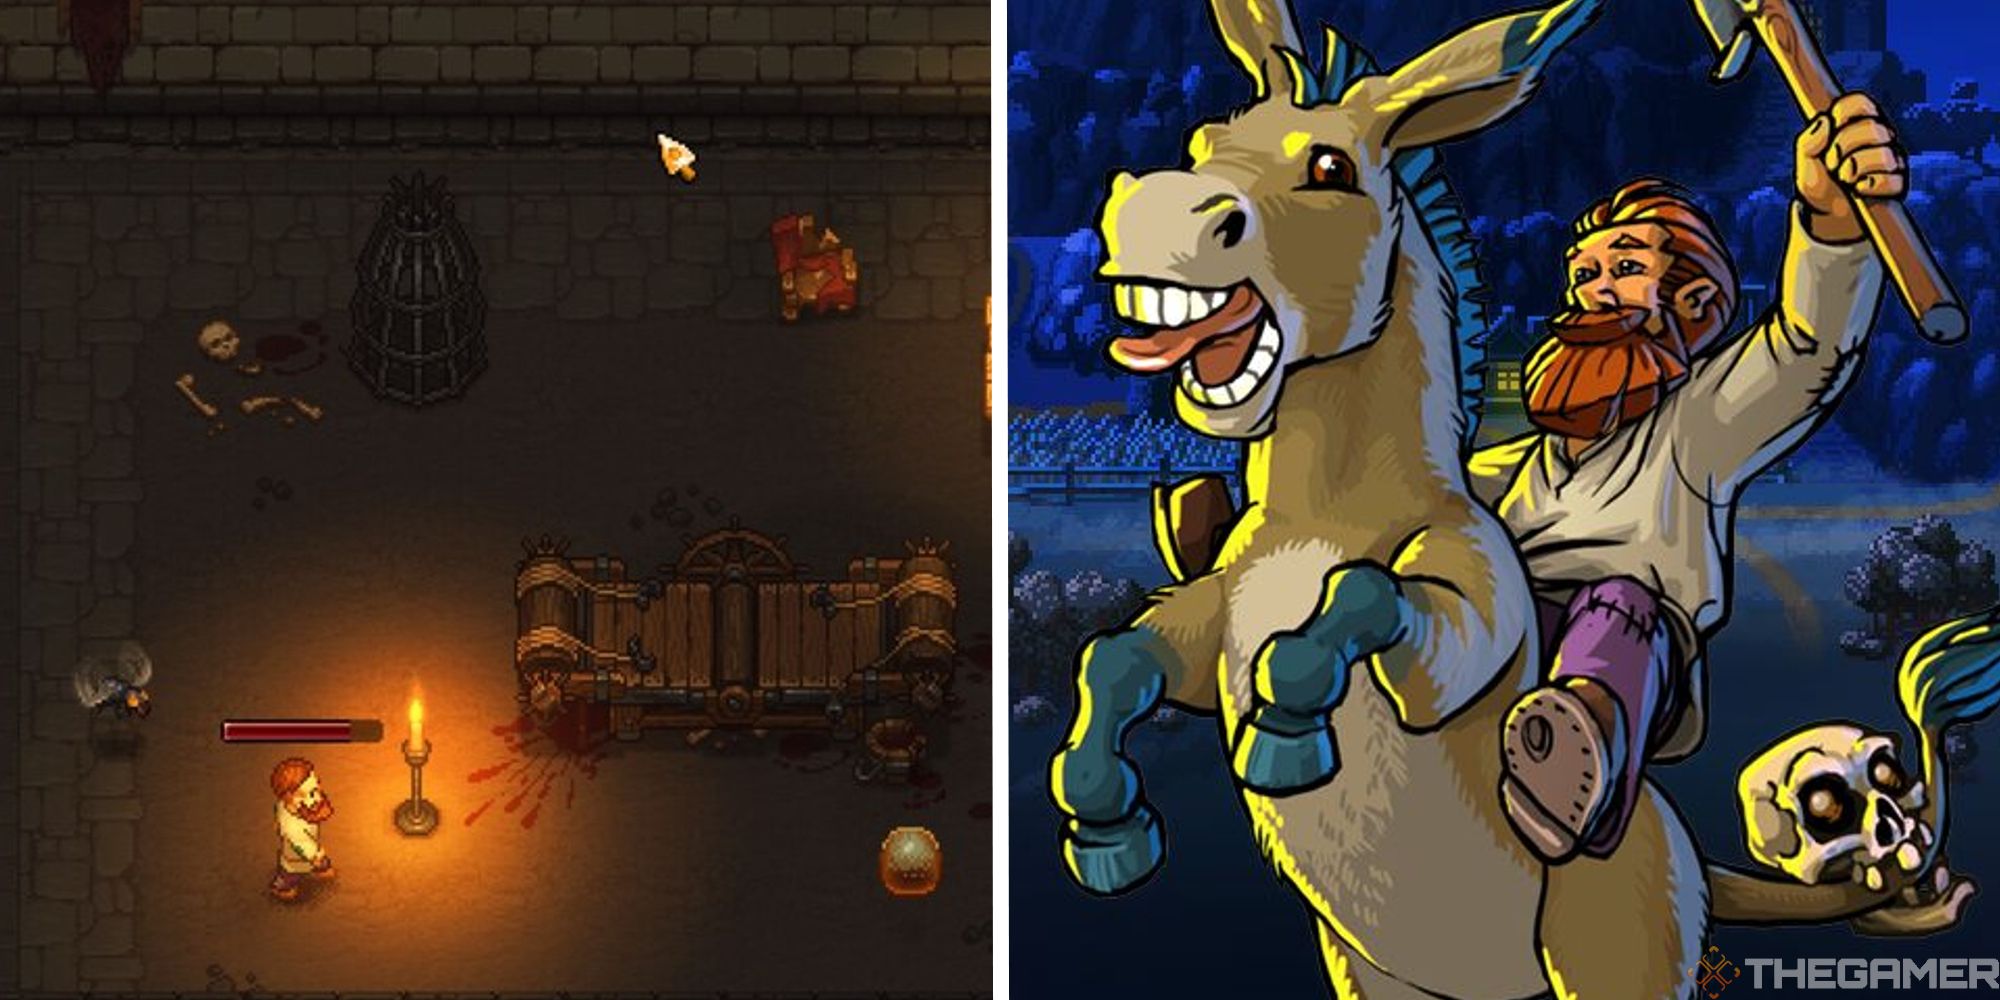 split image showing player in dungeon next to image of player on donkey